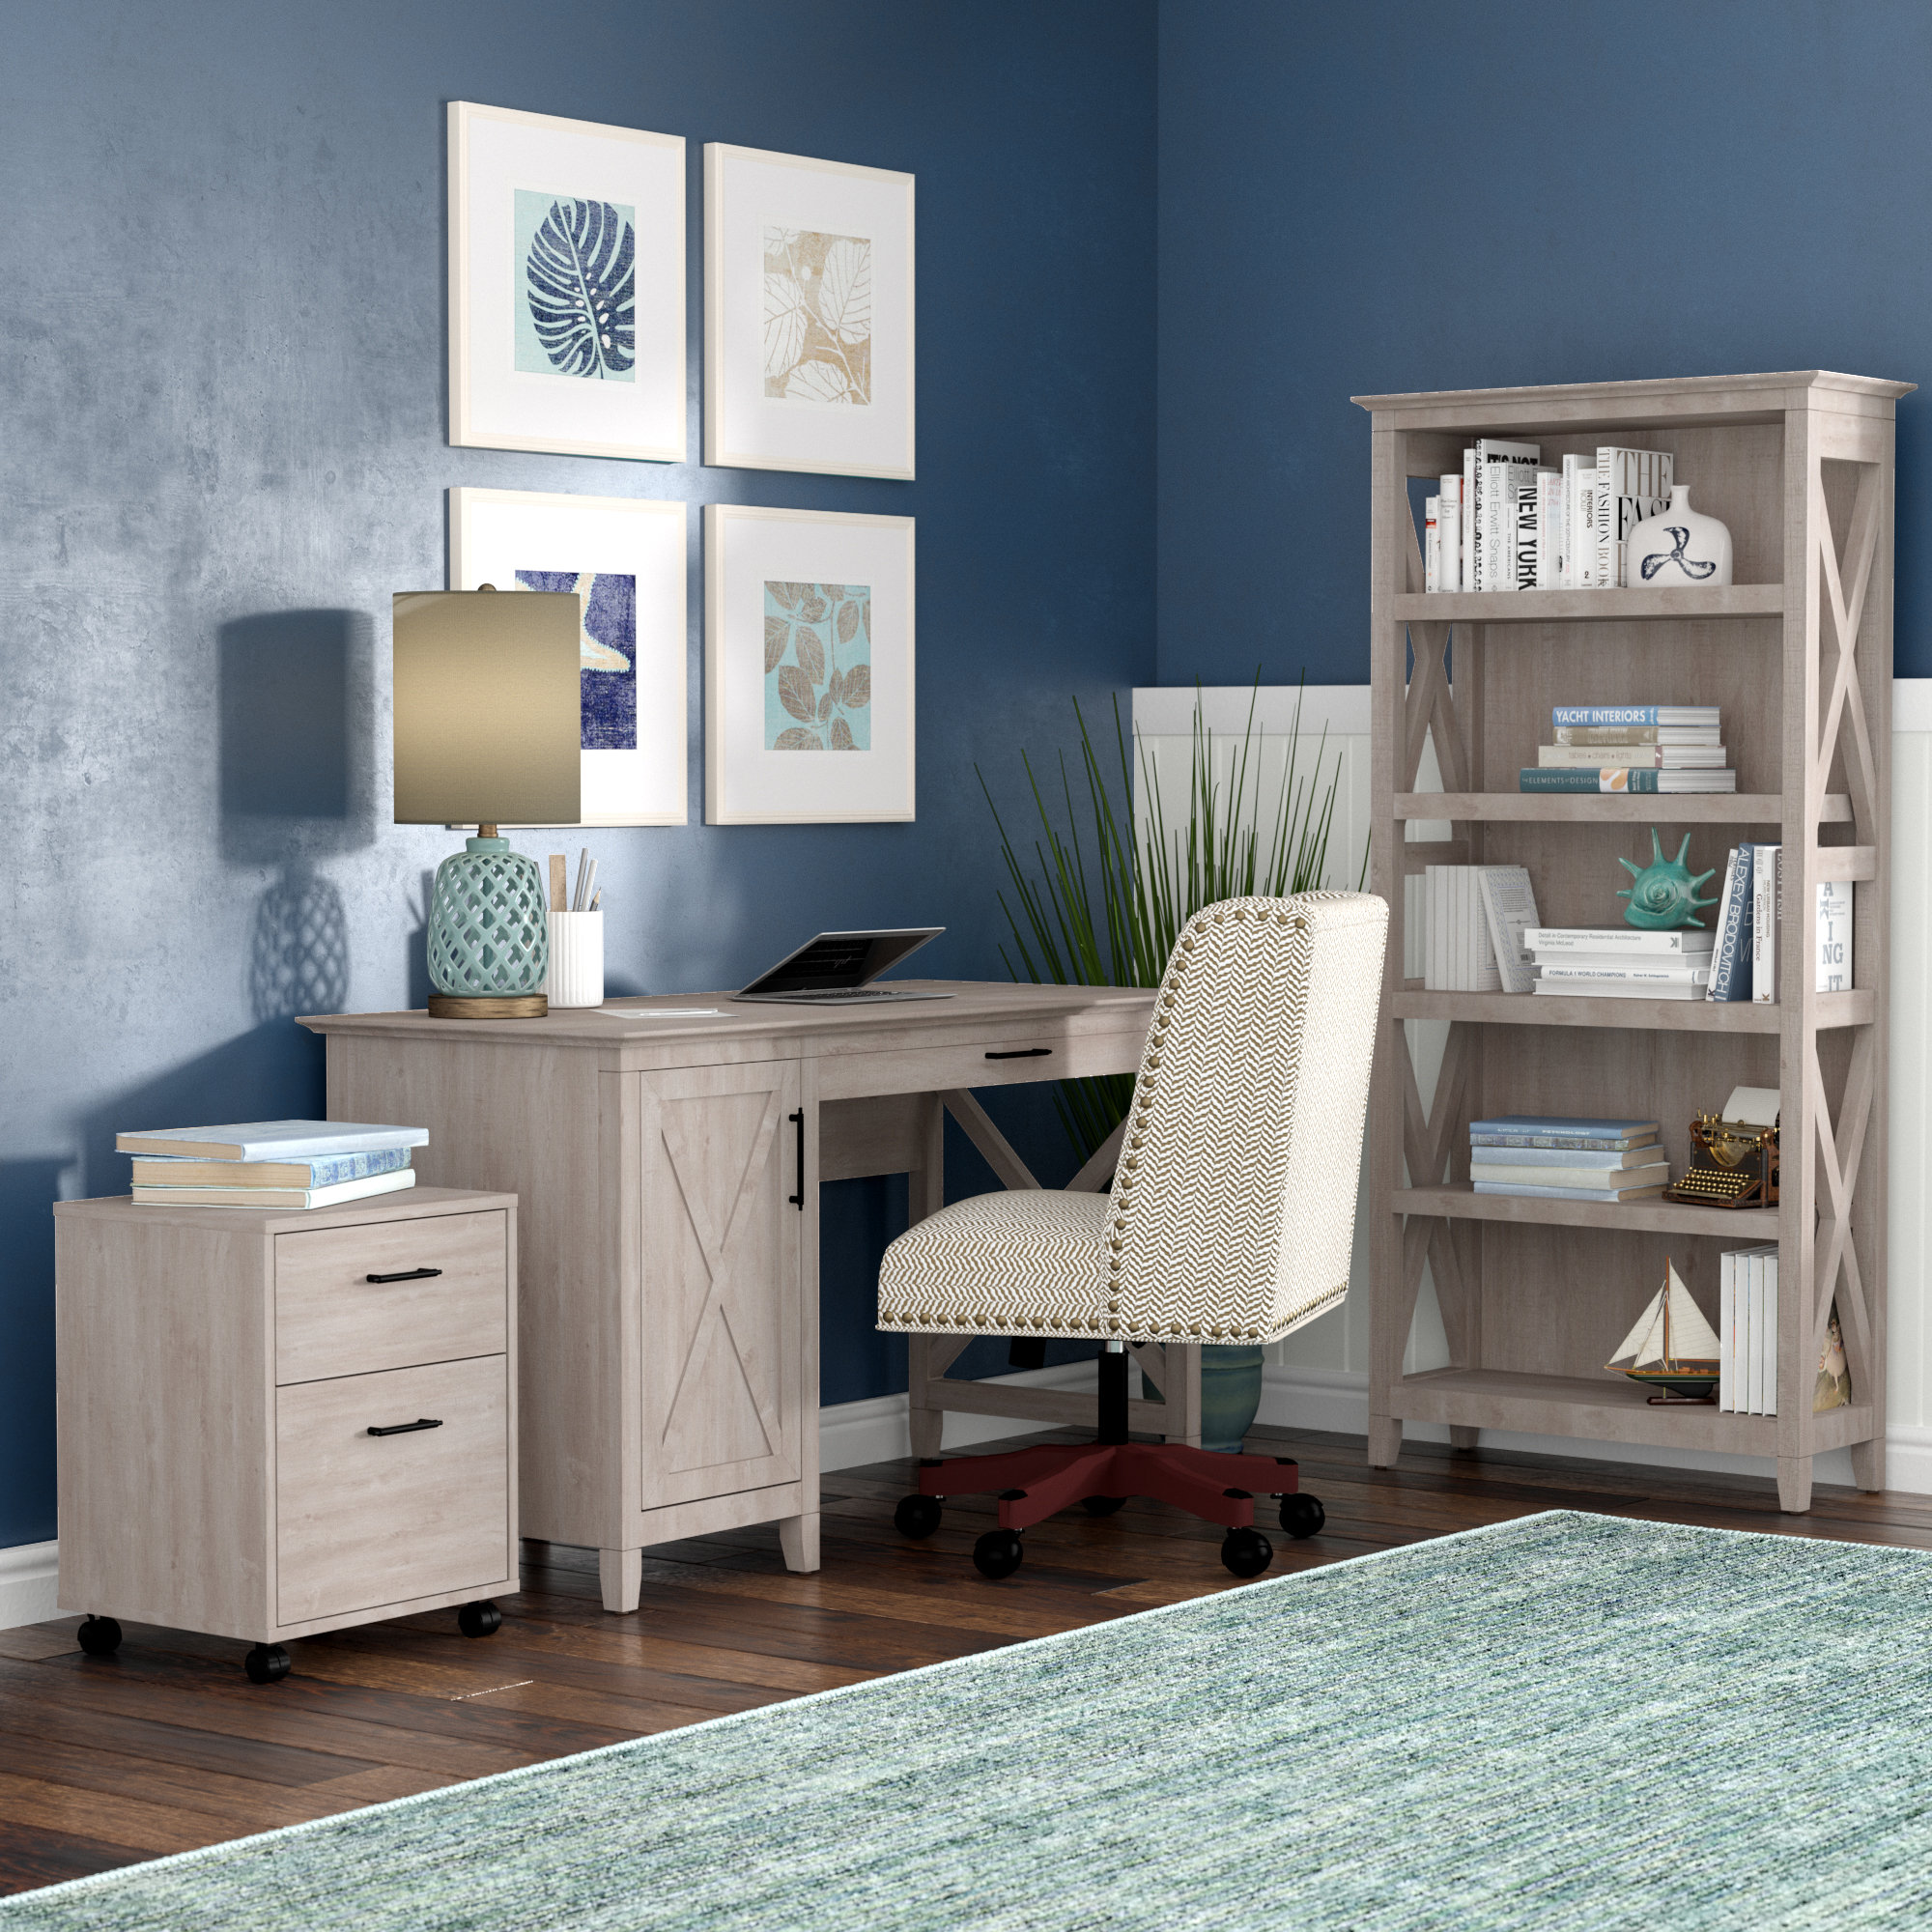 Beachcrest Home Cyra Desk Bookcase And Filing Cabinet Set